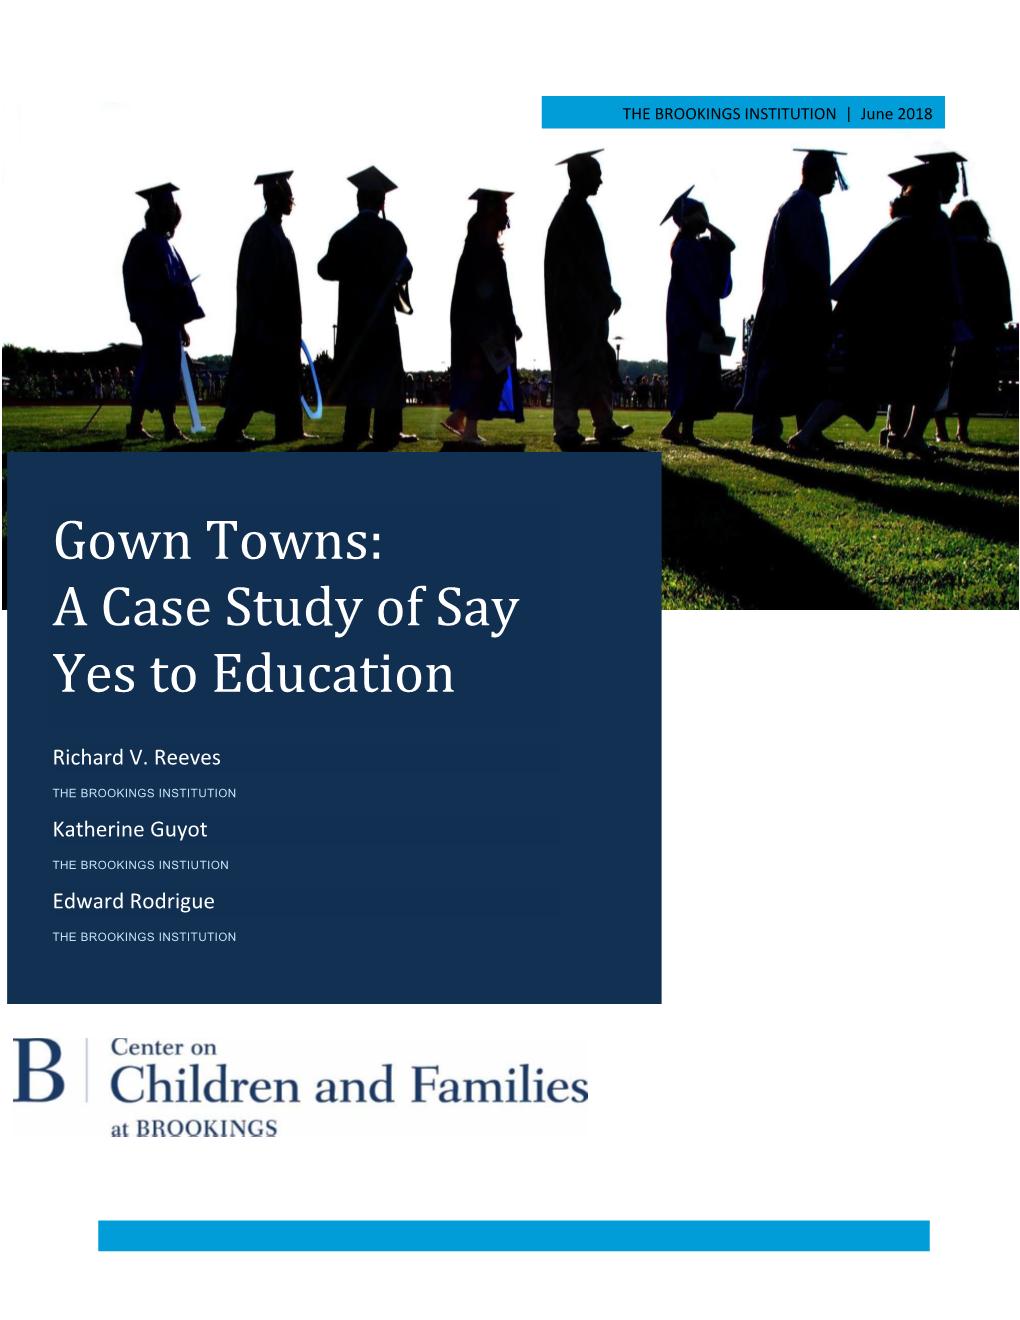 Gown Towns: a Case Study of Say Yes to Education